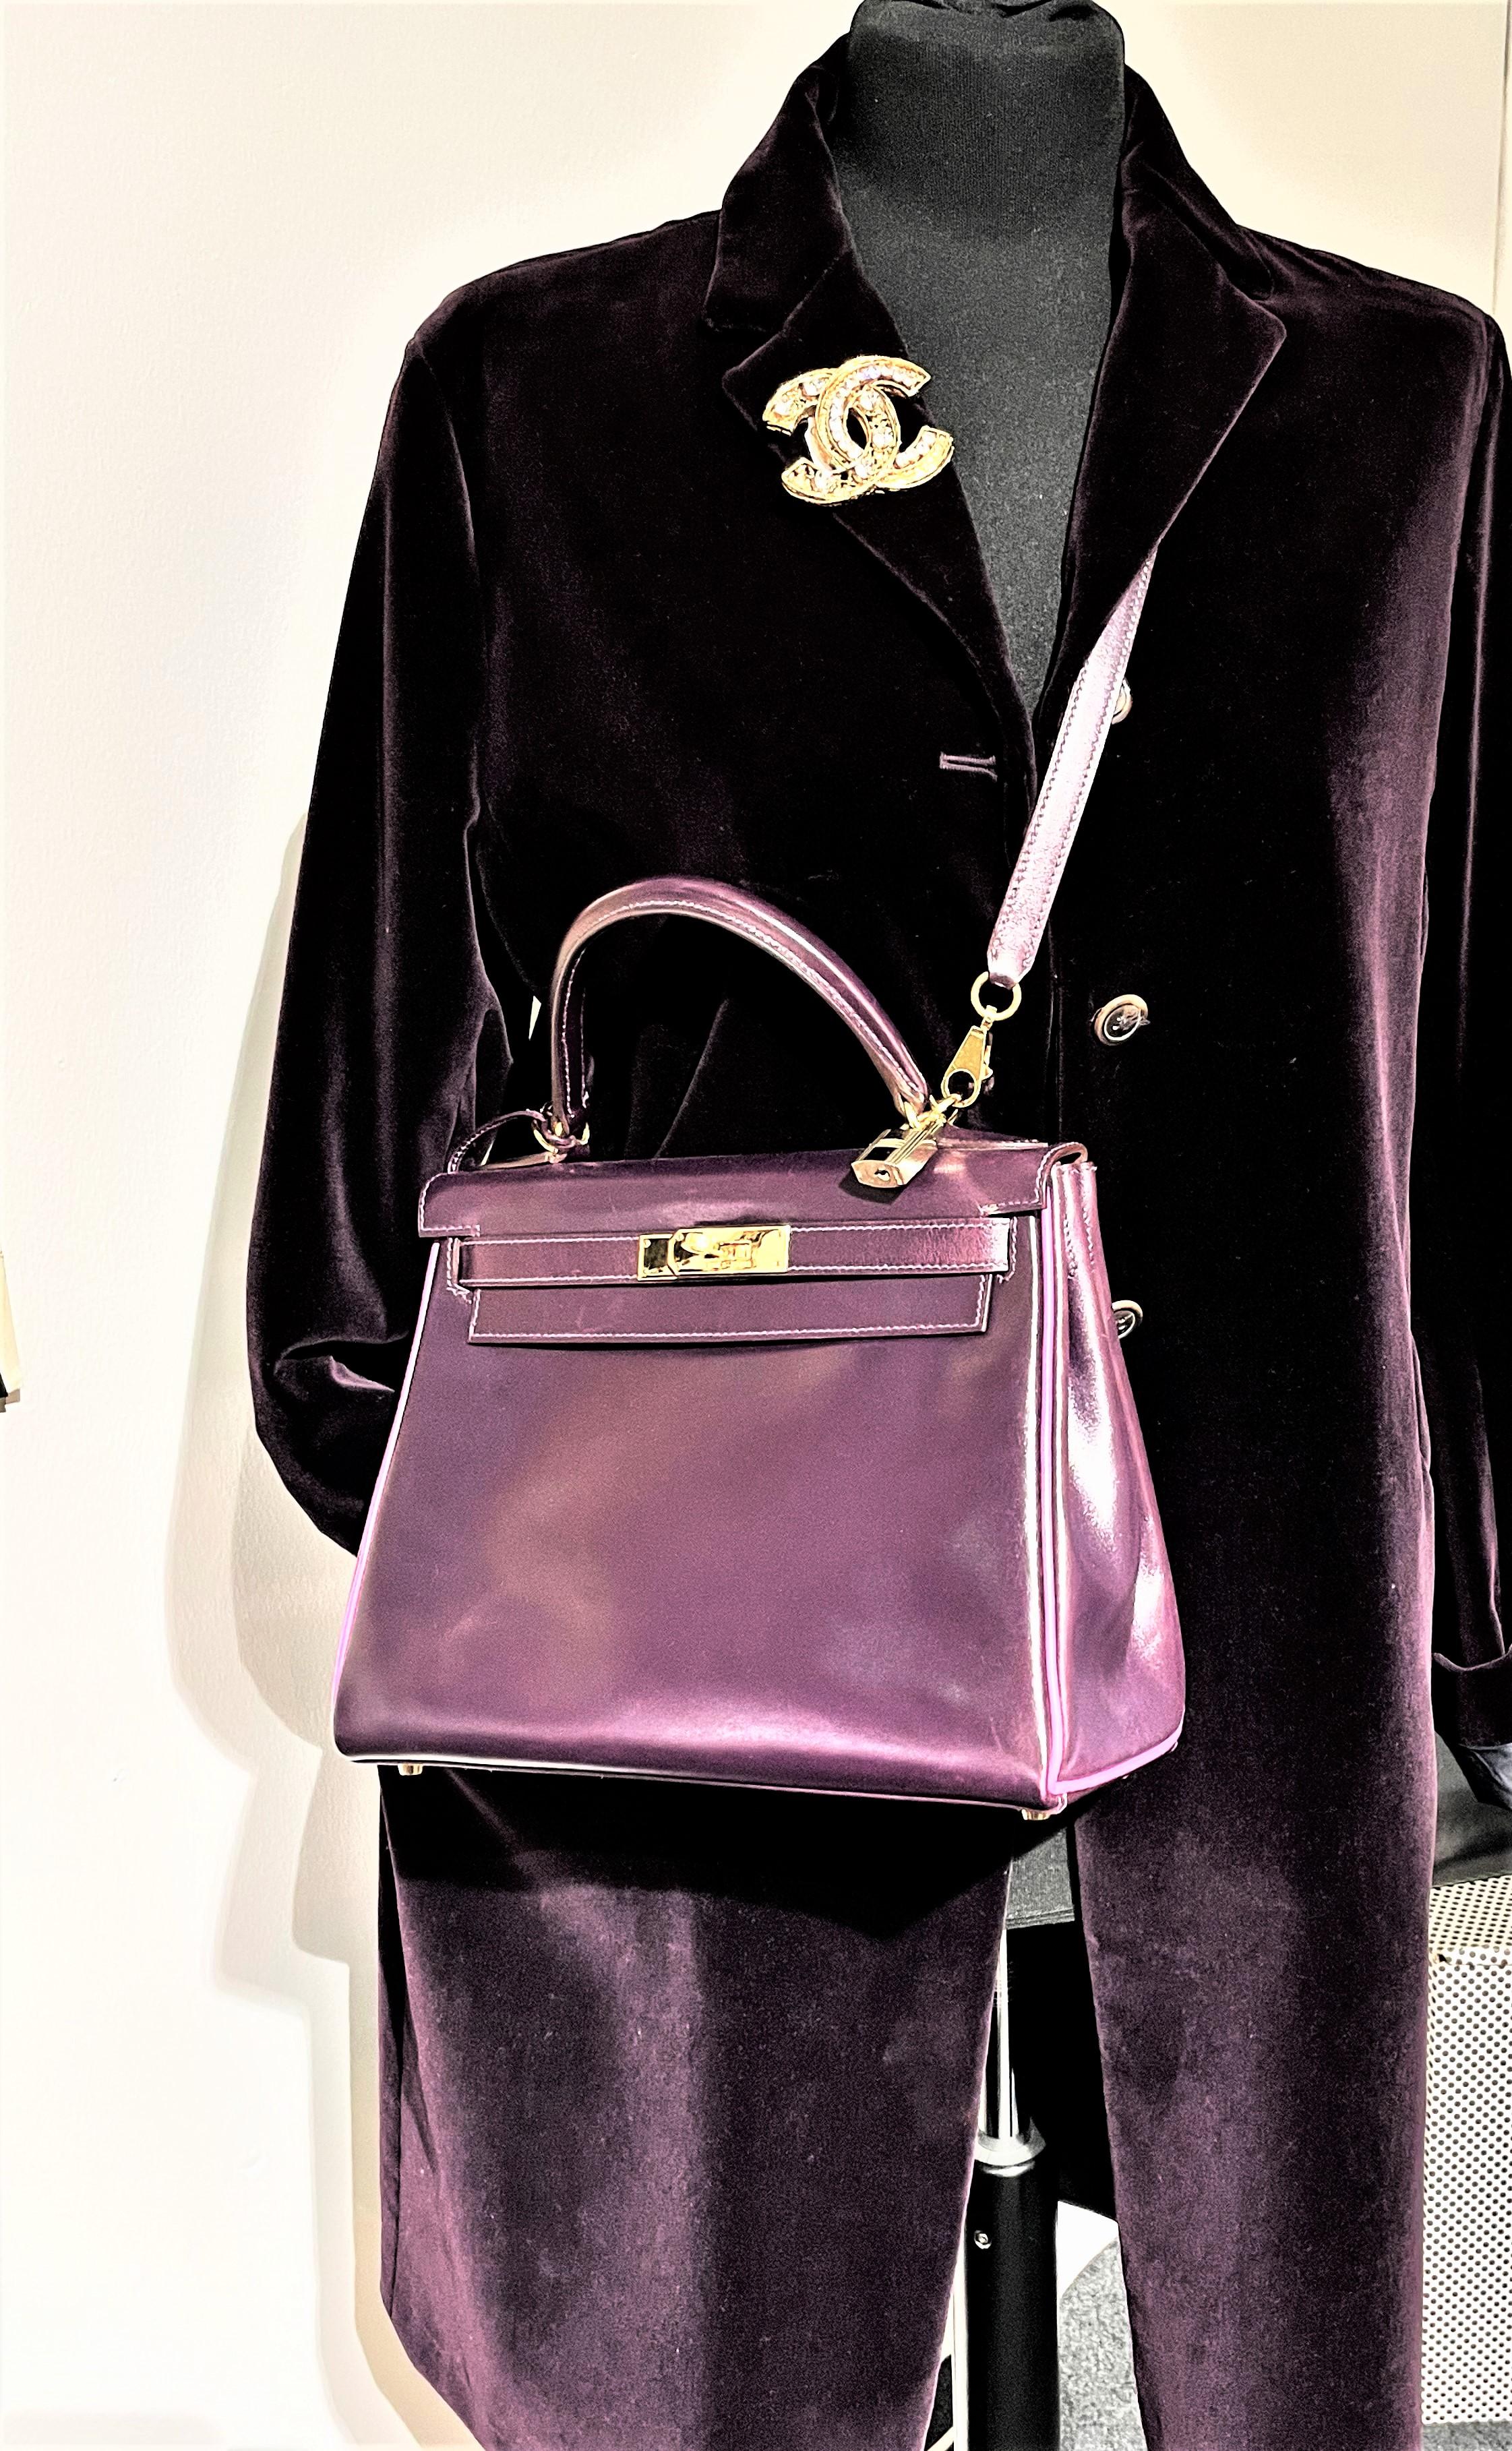 Kelly bag in a very rare purple-pink color, calf leather with gold hardware. 4 side seams polished with pink leather pass and lined with pink leather inside!

This is a special, custom bag made for an Hermès employee, as indicated by the stamp next